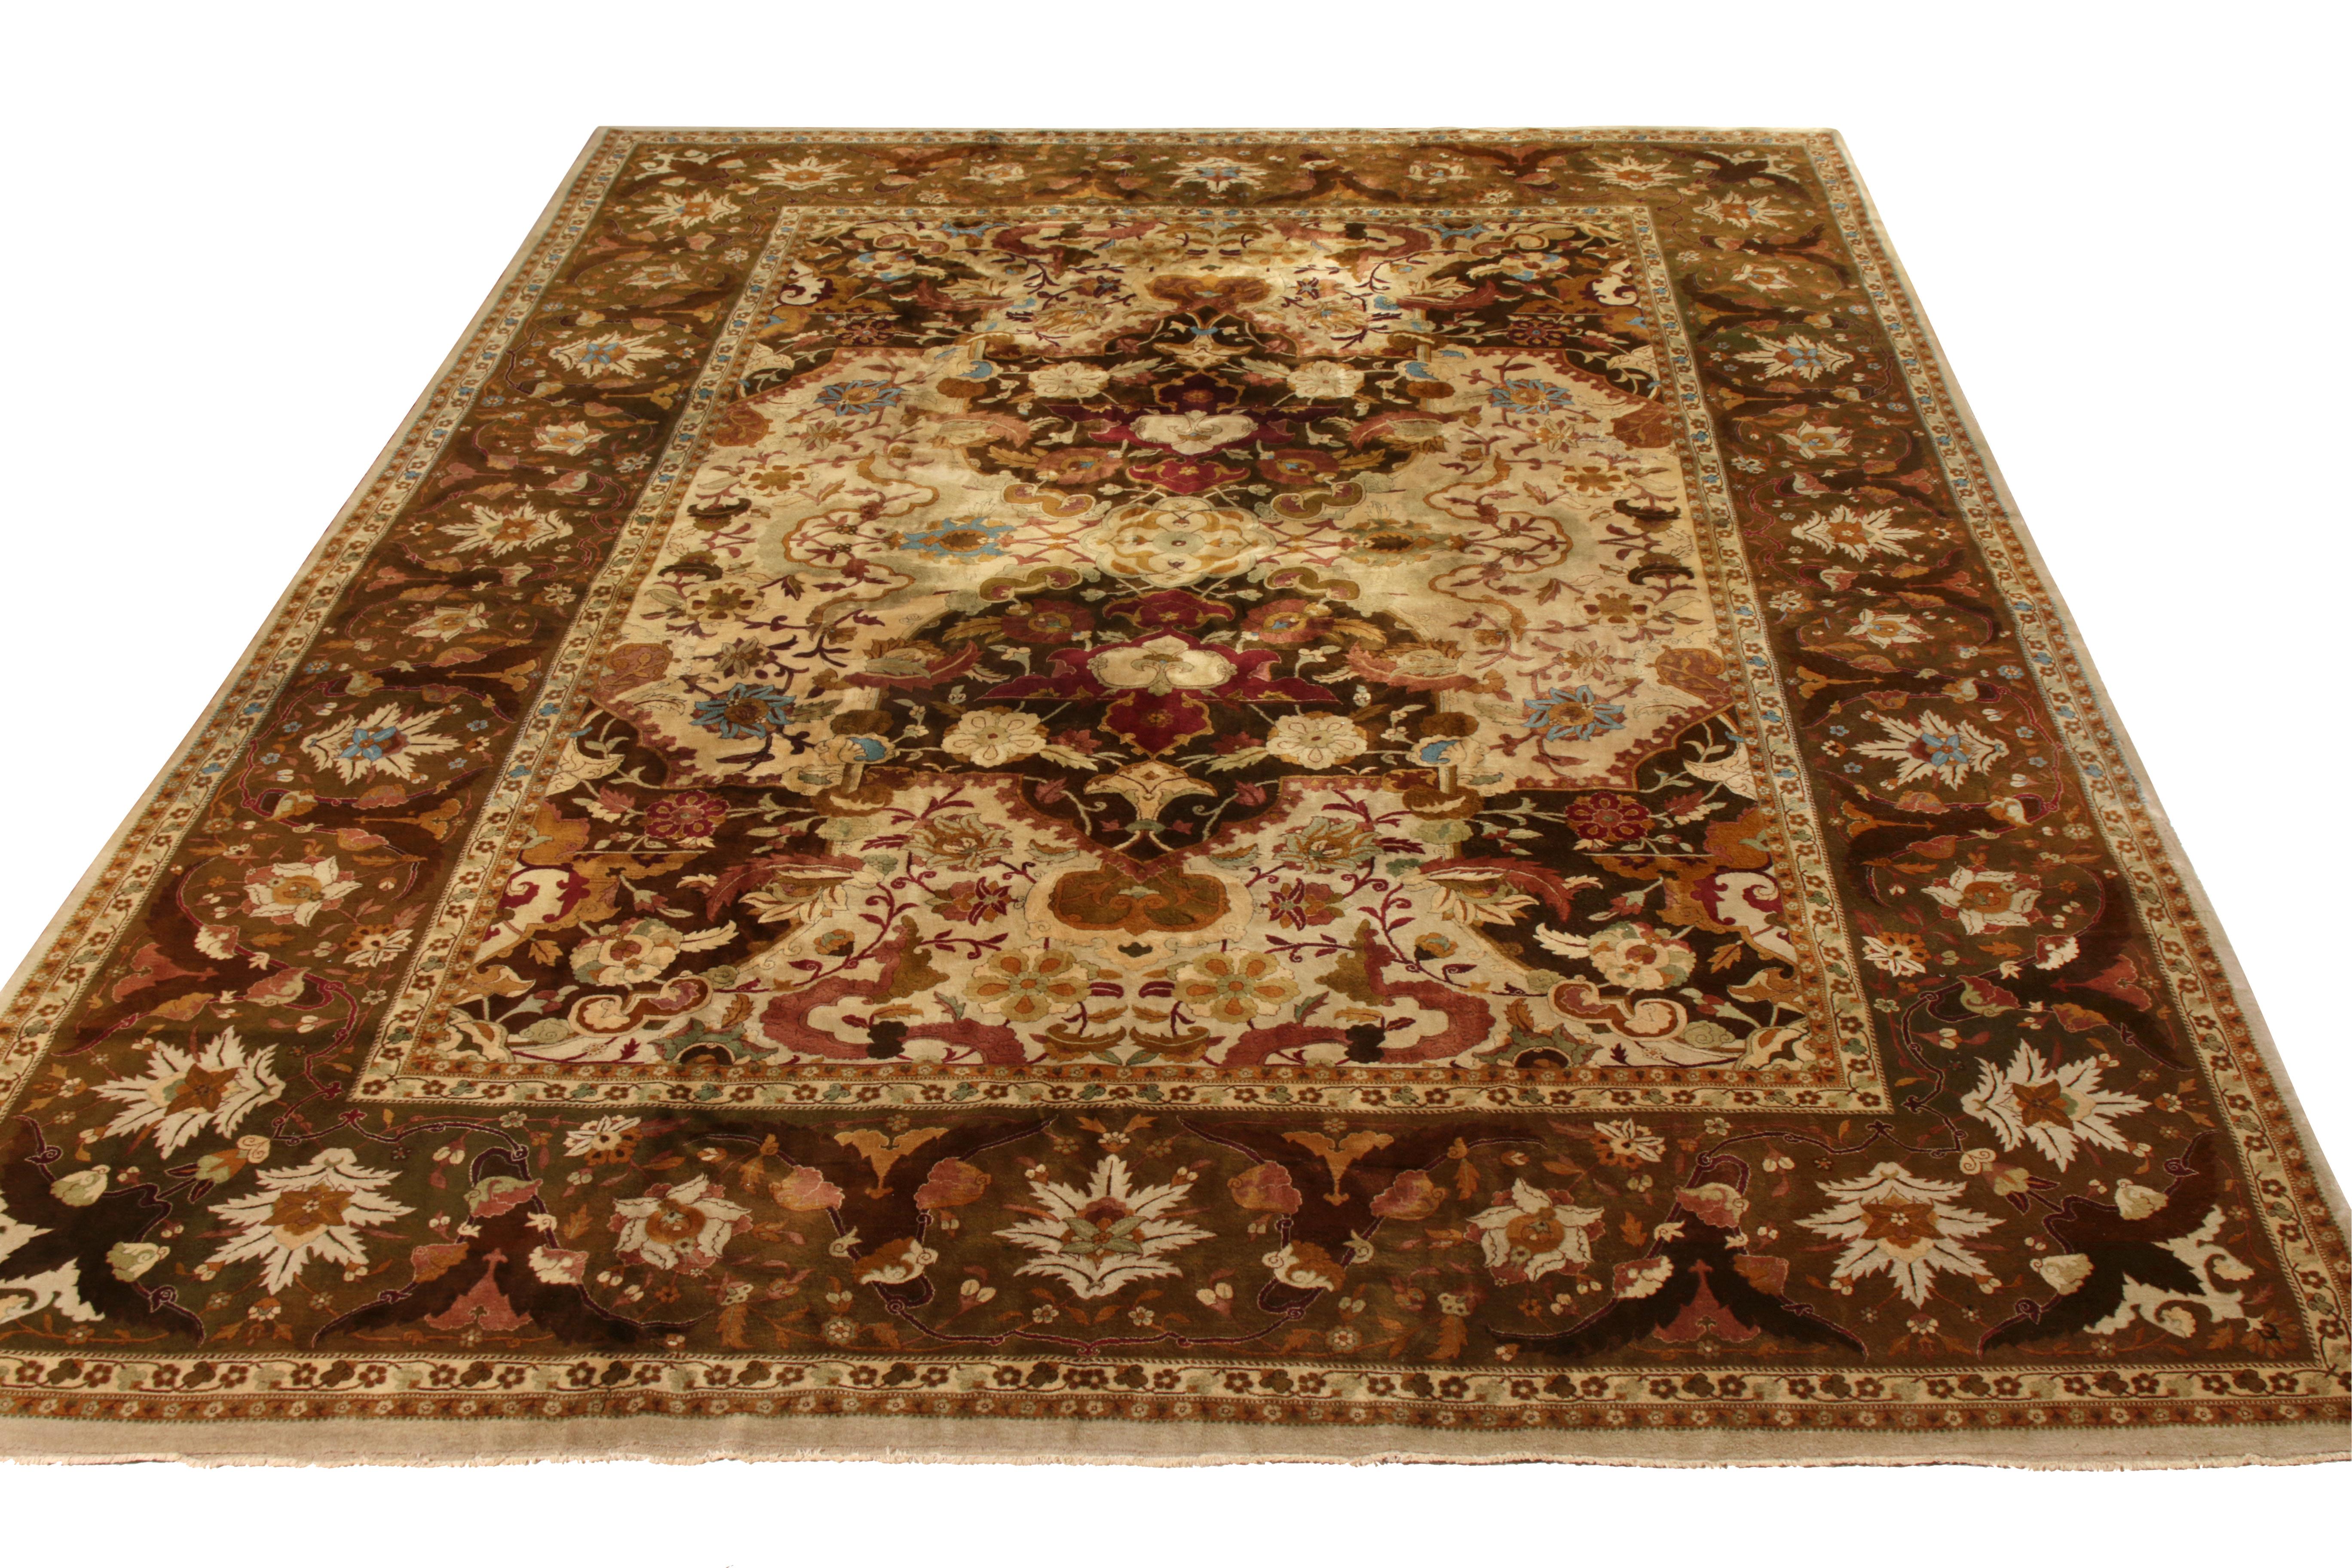 Hand-knotted in wool circa 1910-1920, this antique 10x13 rug is a rare Indian interpretation of Persian Shahrestan rugs—a new unveiling. 

On the Design: 

This piece enjoys a regal air with fine details in dense floral patterns on beige and brown